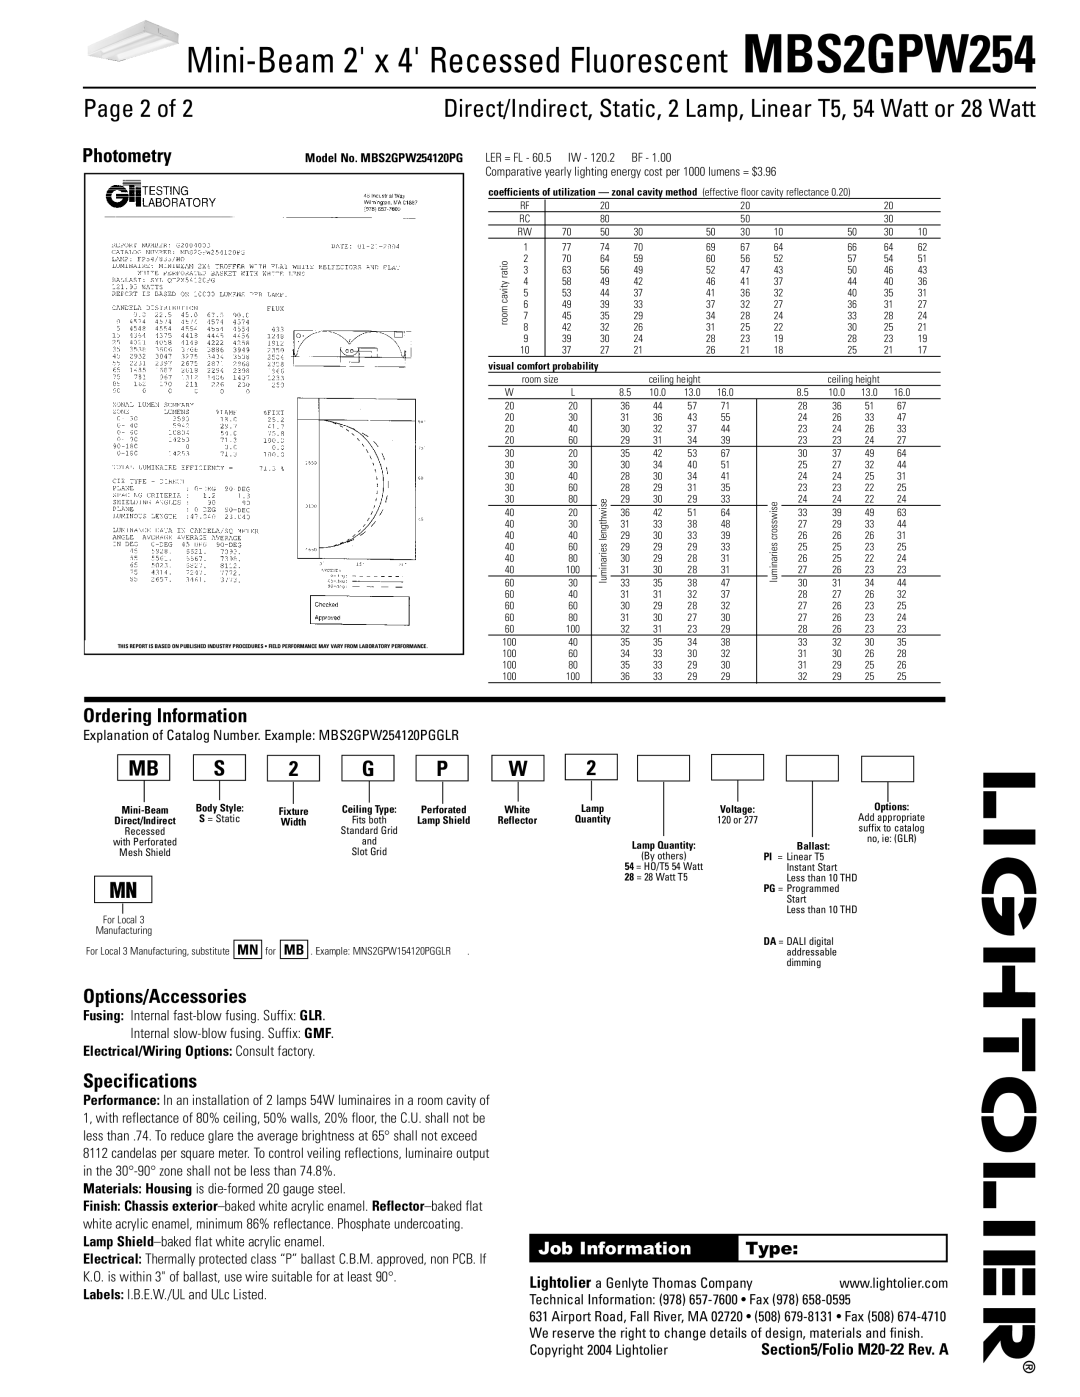 Lightolier MBS2GPW254 Page 2 of, Photometry, Ordering Information, Options/Accessories, Specifications, Job Information 